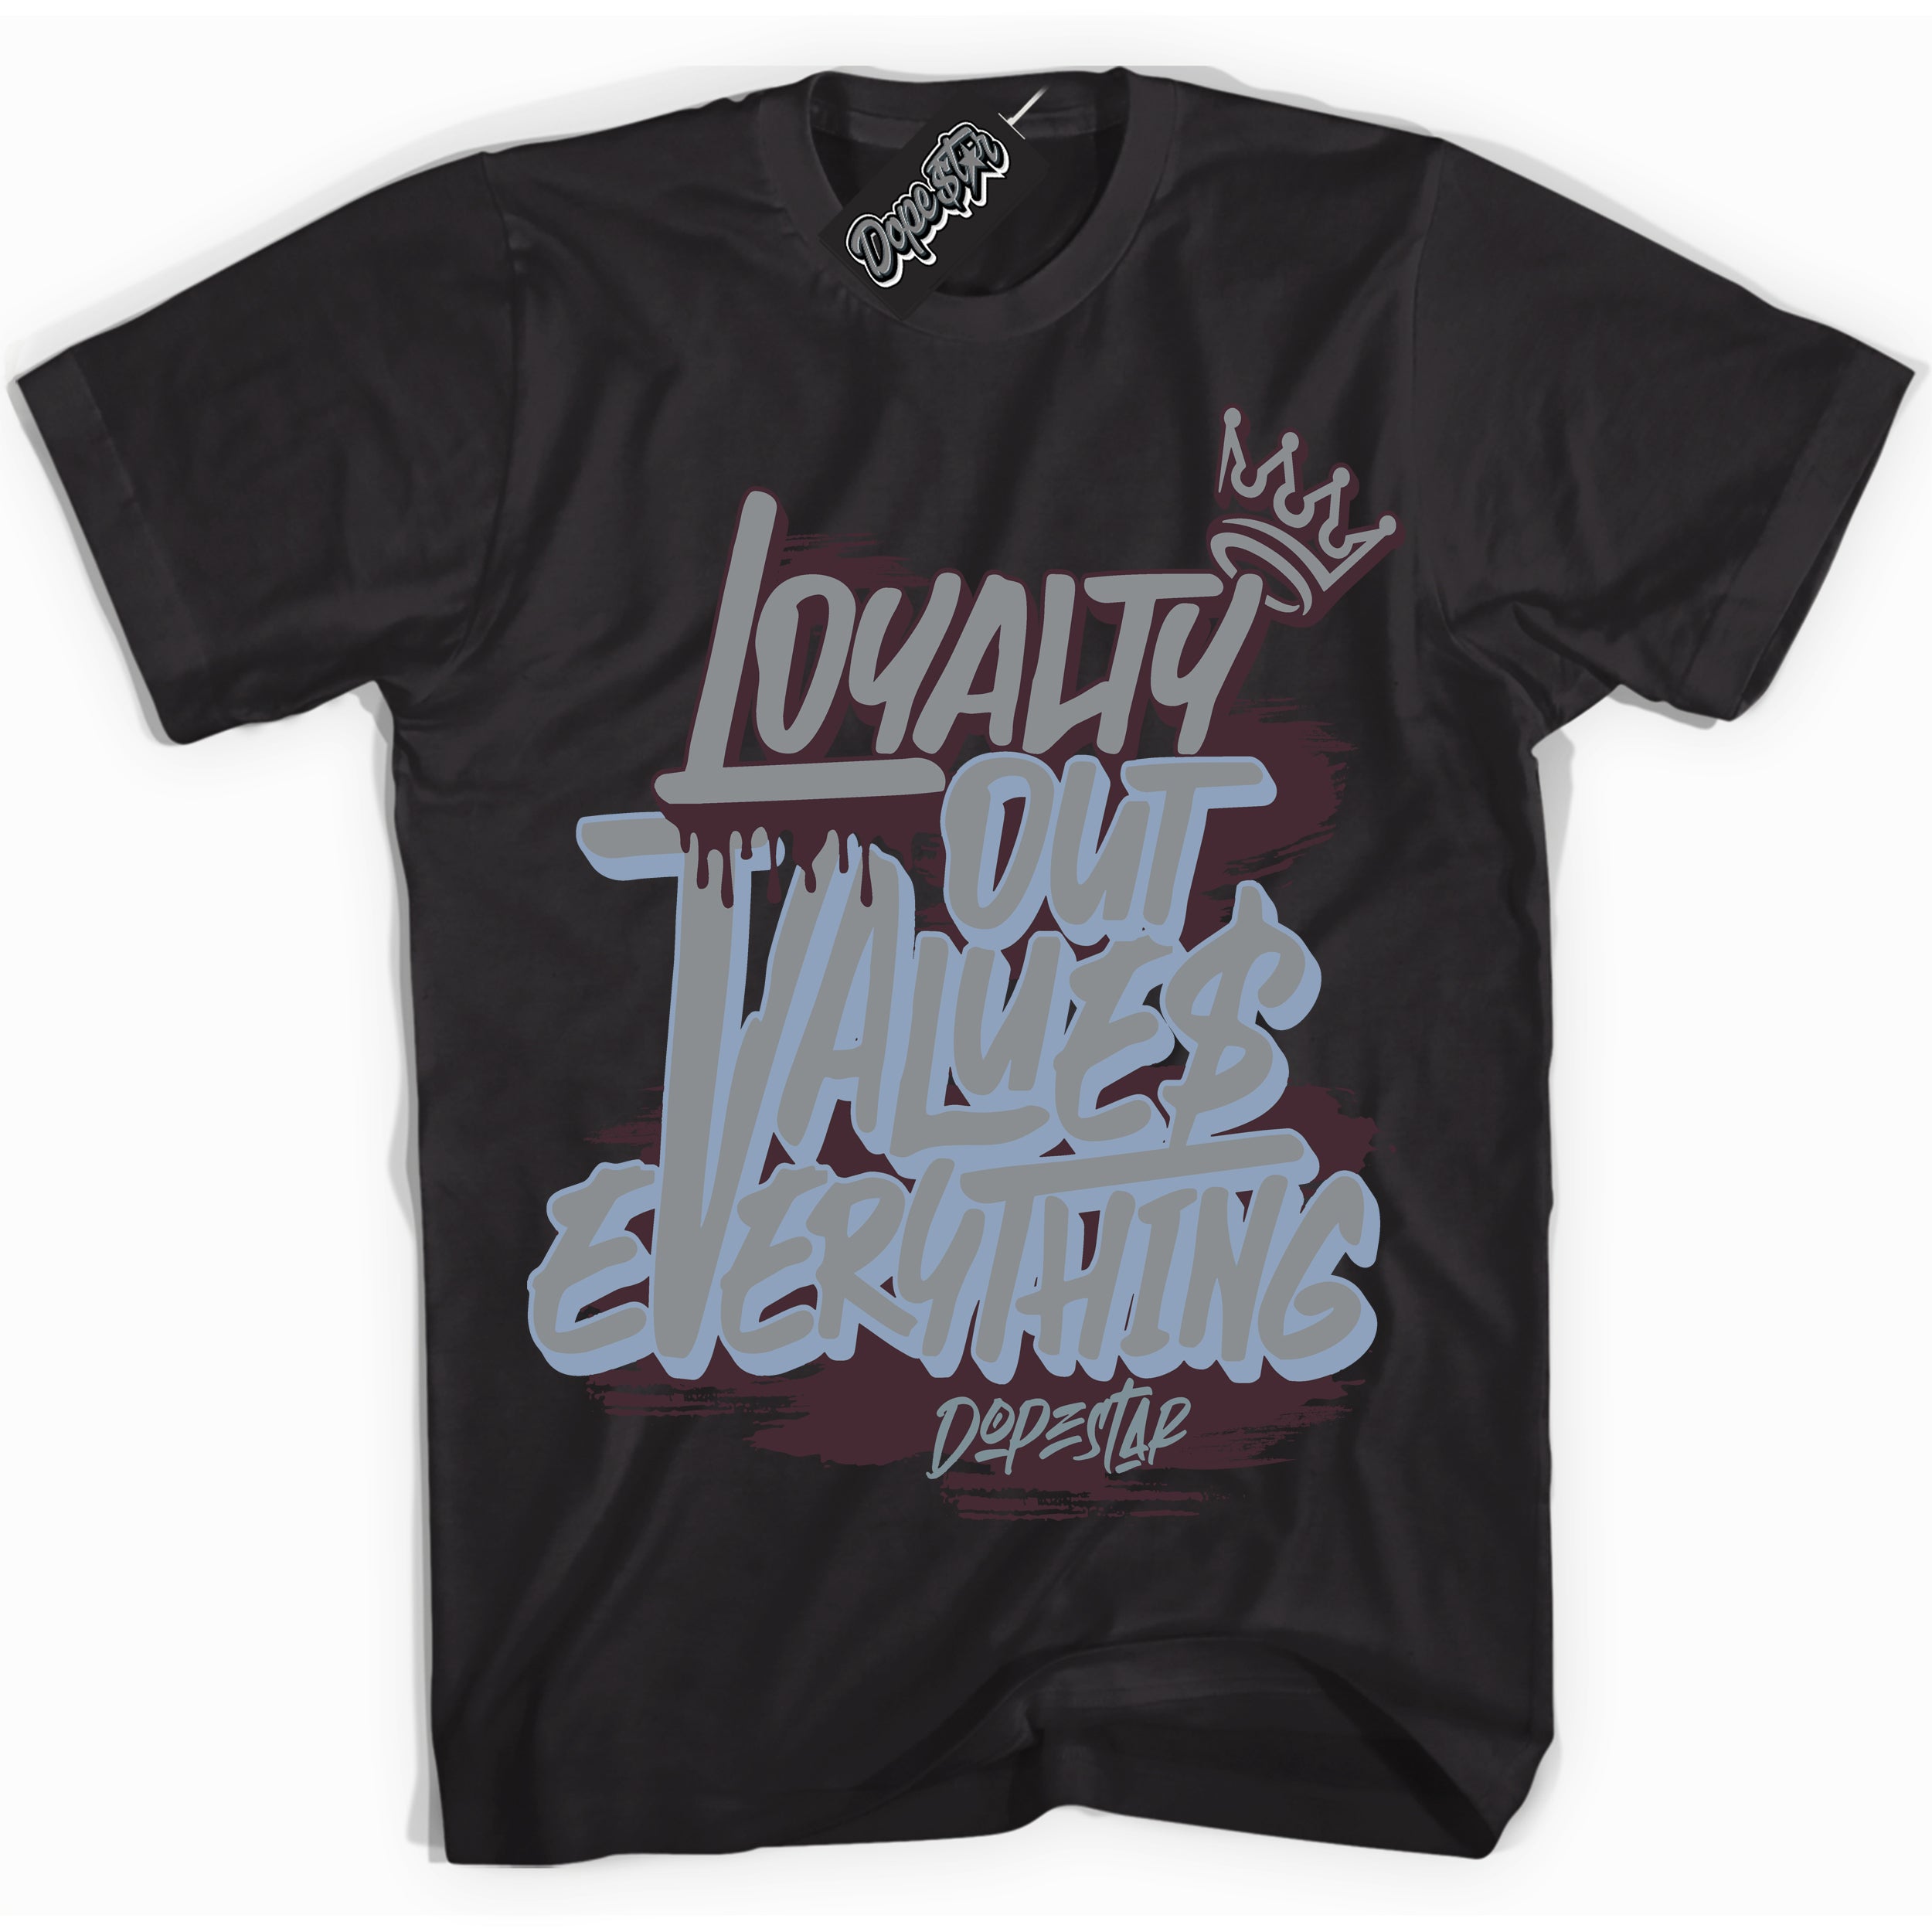 Cool Black Shirt with “ Loyalty Out Values Everything” design that perfectly matches Burgundy 5s Sneakers.